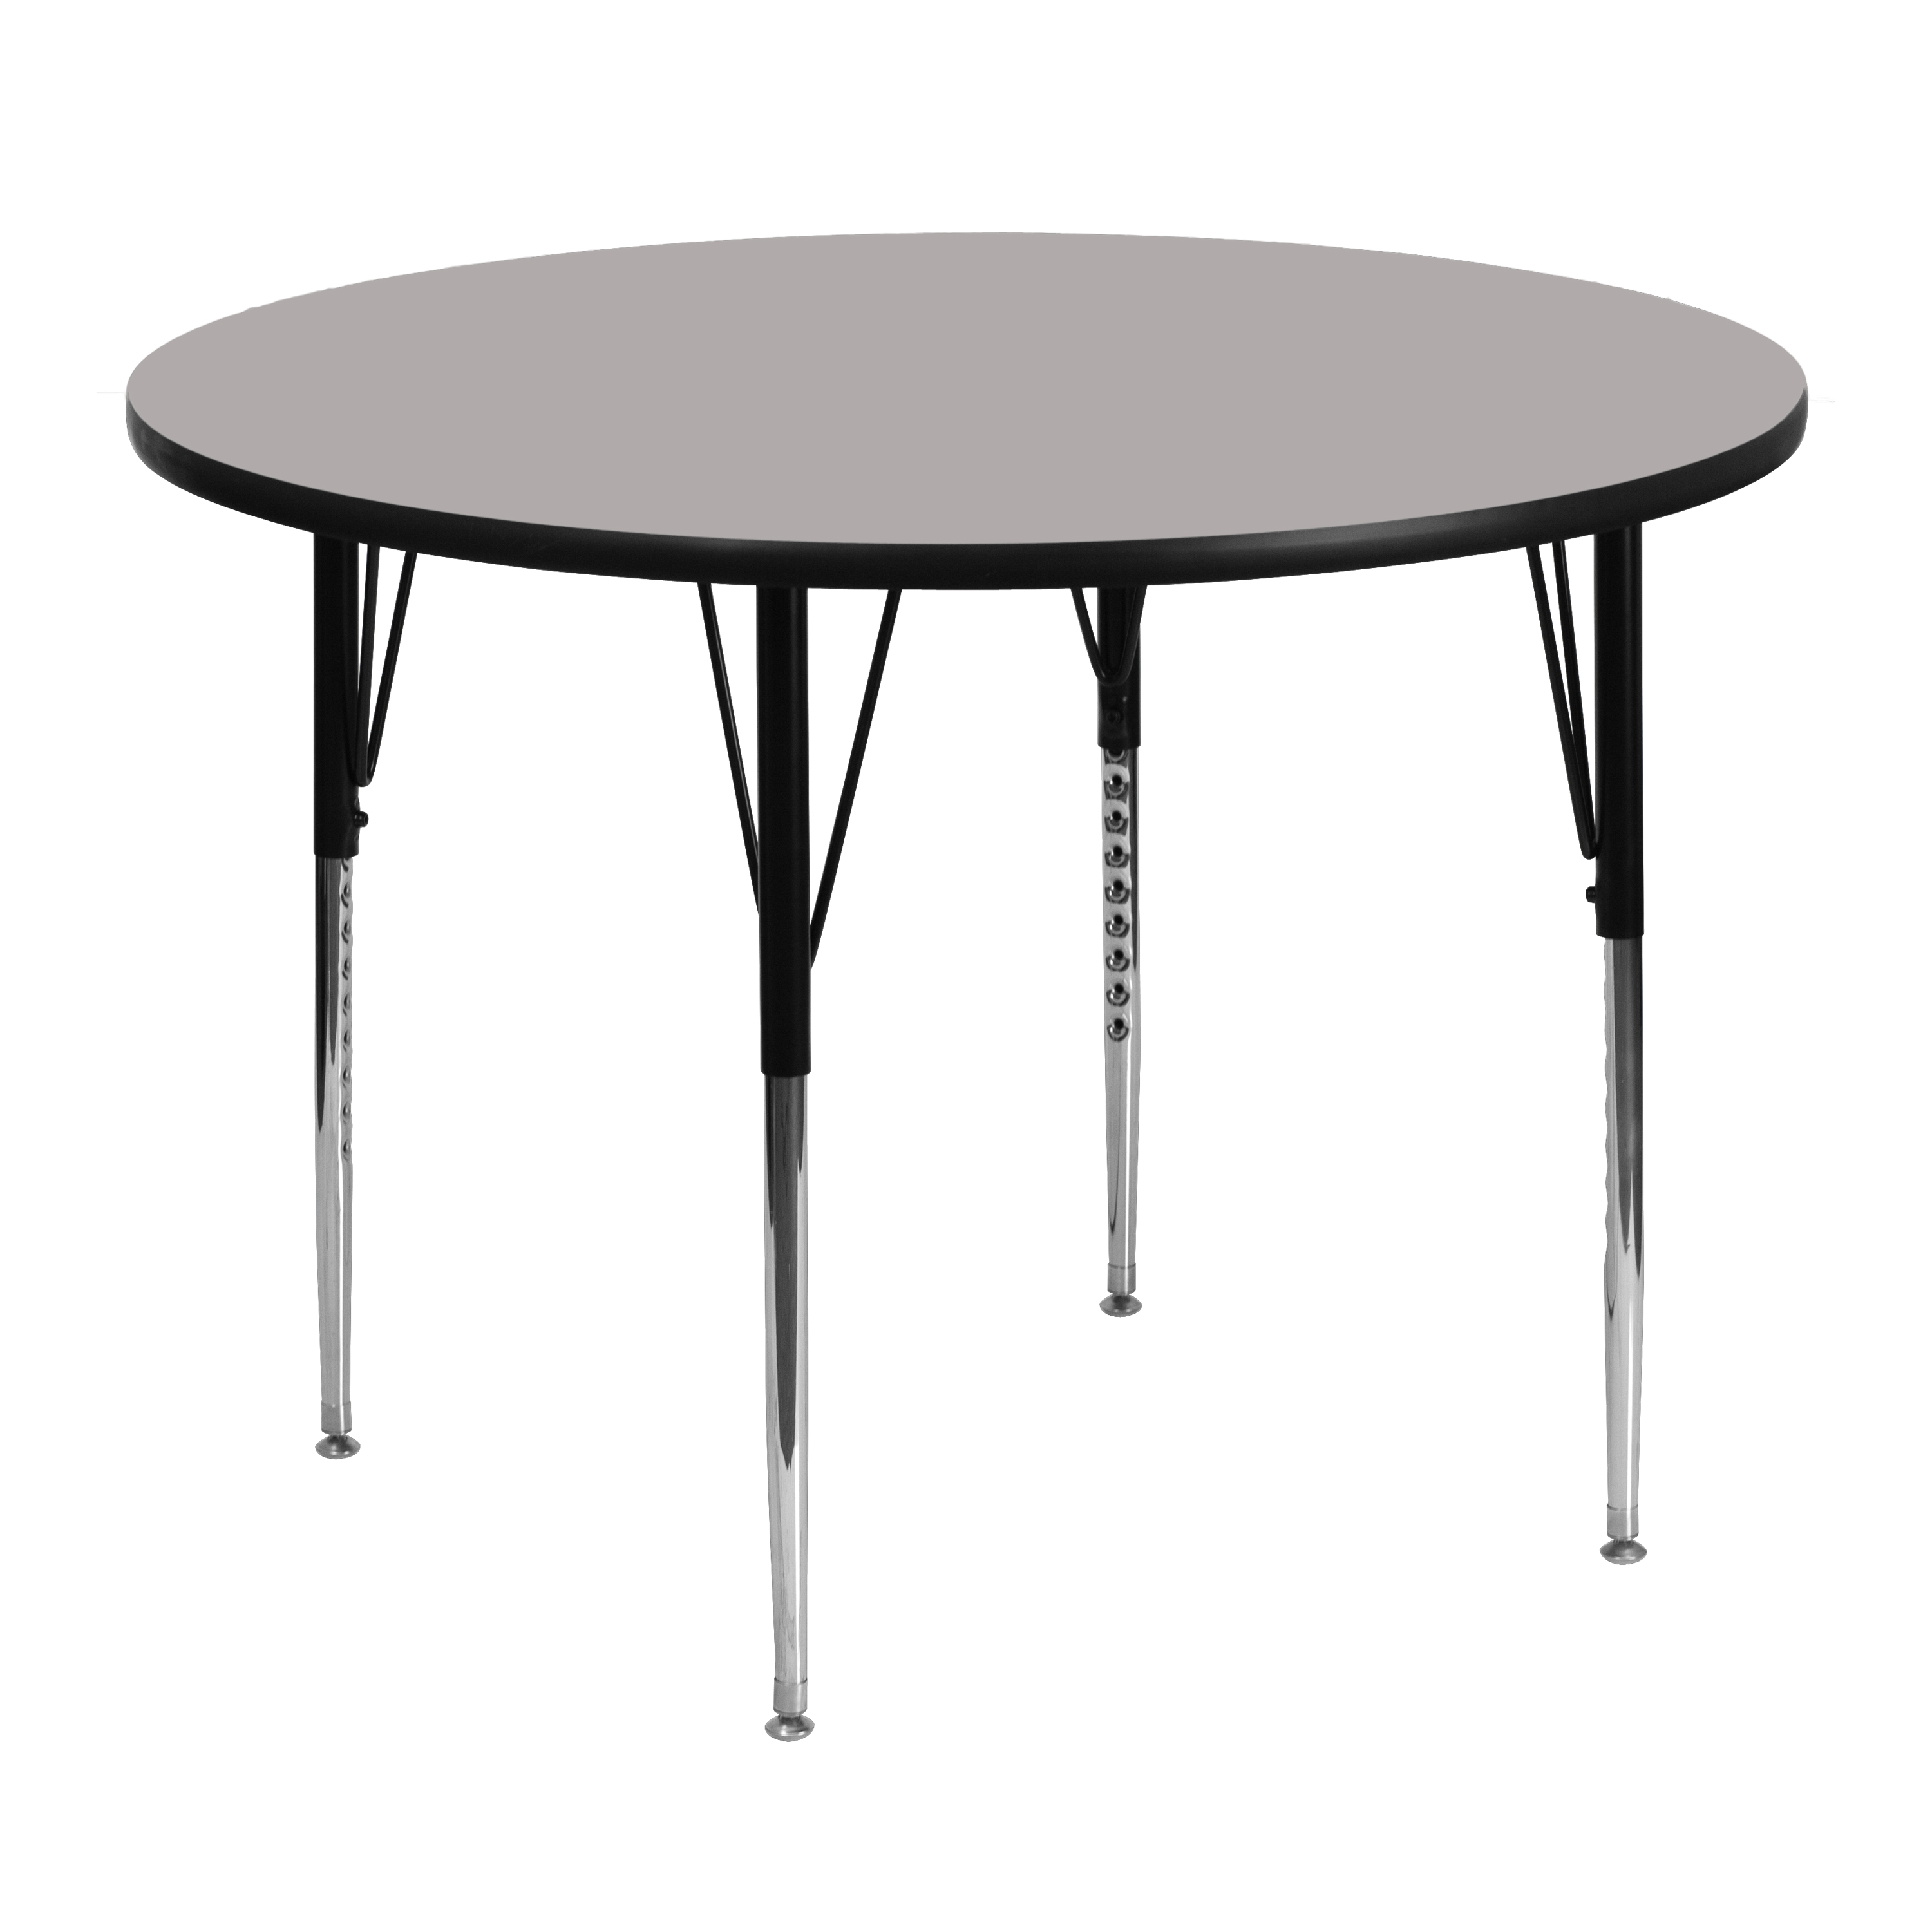 Flash Furniture 48'' Round Grey HP Laminate Activity Table - Standard Height Adjustable Legs - image 1 of 4